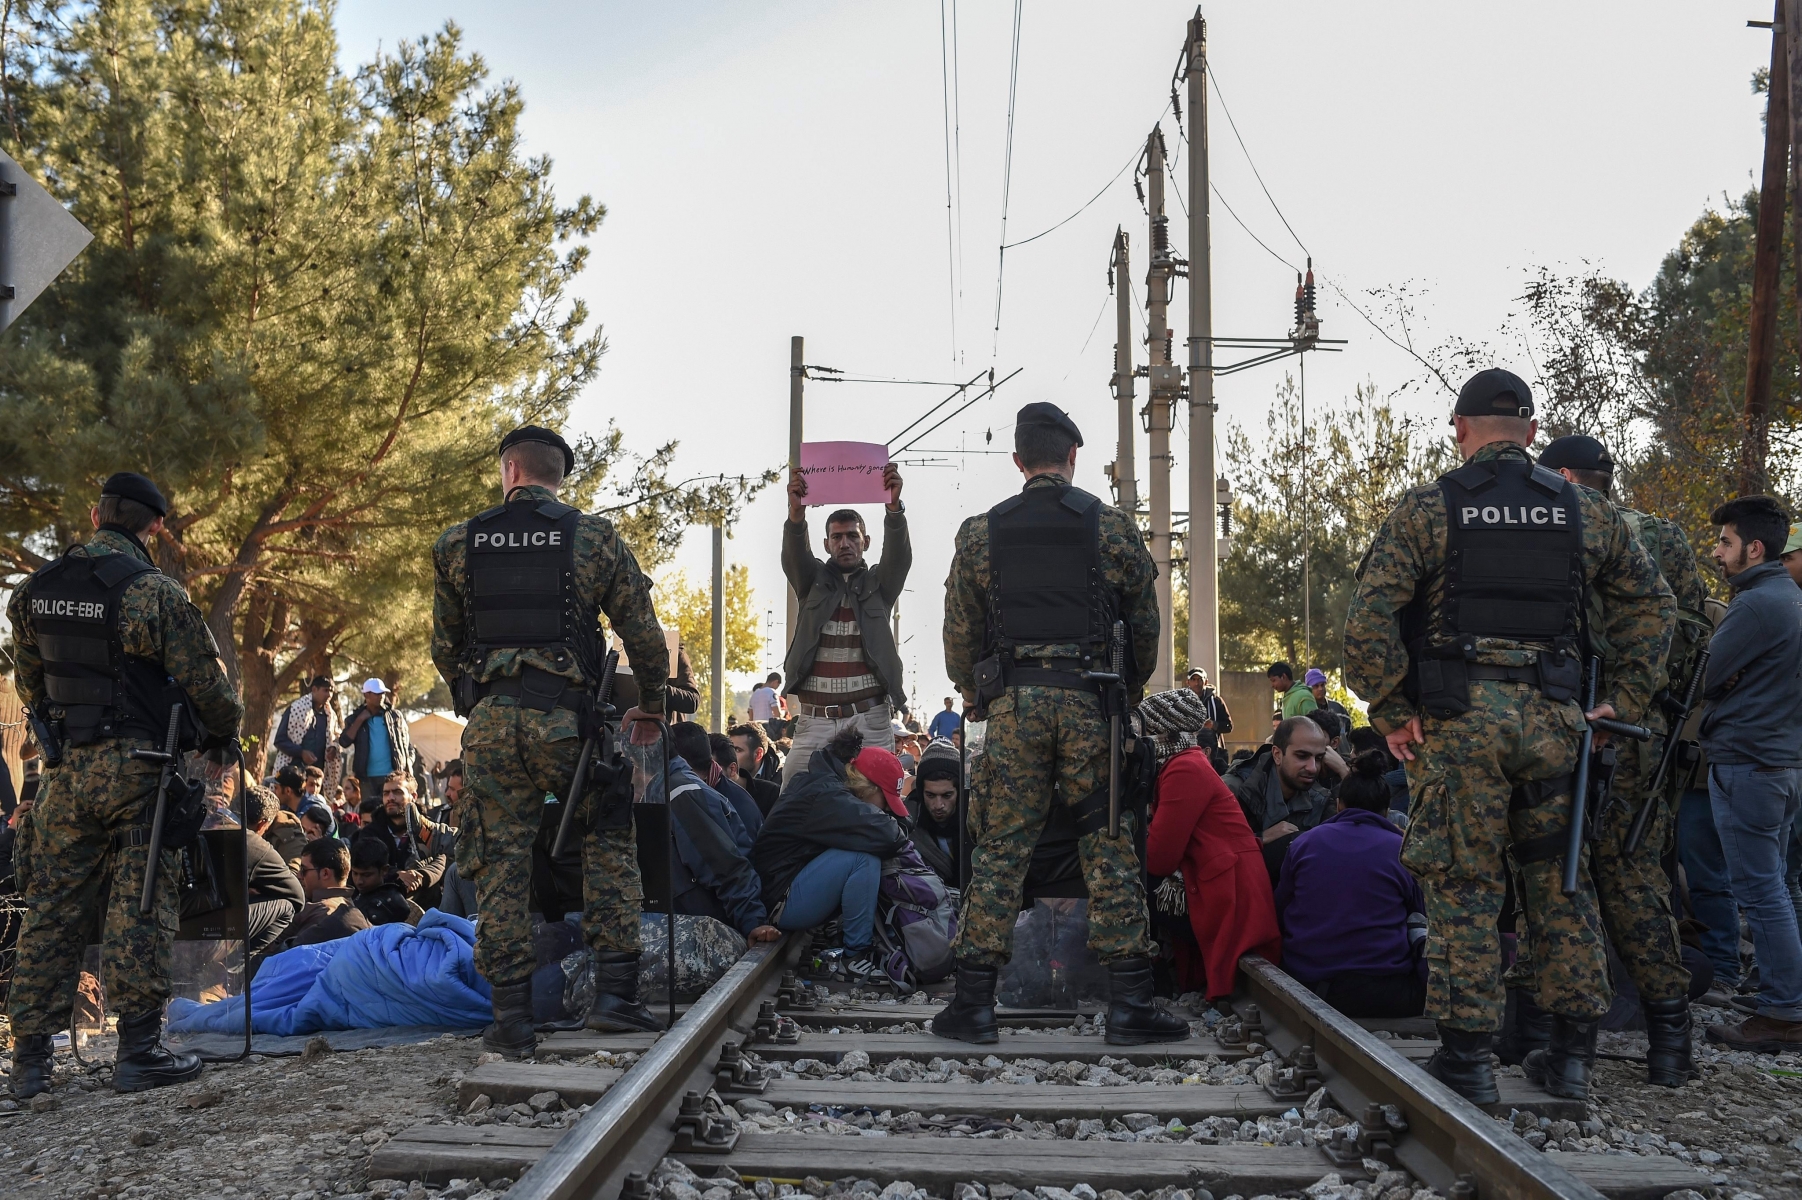 epa05032649 A group of migrants from Iran, Pakistan and Morocco block the border line between Greece and Macedonia as they protest after Macedonia has started granting passage only to refugees from Syria, Iraq and Afghanistan, near Gevegelija, The Former Yugoslav Republic of Macedonia, 19 November 2015. Macedonia, Serbia and Croatia have started restricting access to migrants on the Balkan route to Syrians, Iraqis and Afghans. It is a part of a joint effort to reduce the number of asylum seekers streaming into the European Union.  EPA/GEORGI LICOVSKI FYROM MIGRATION REFUGEES RESTRICTION